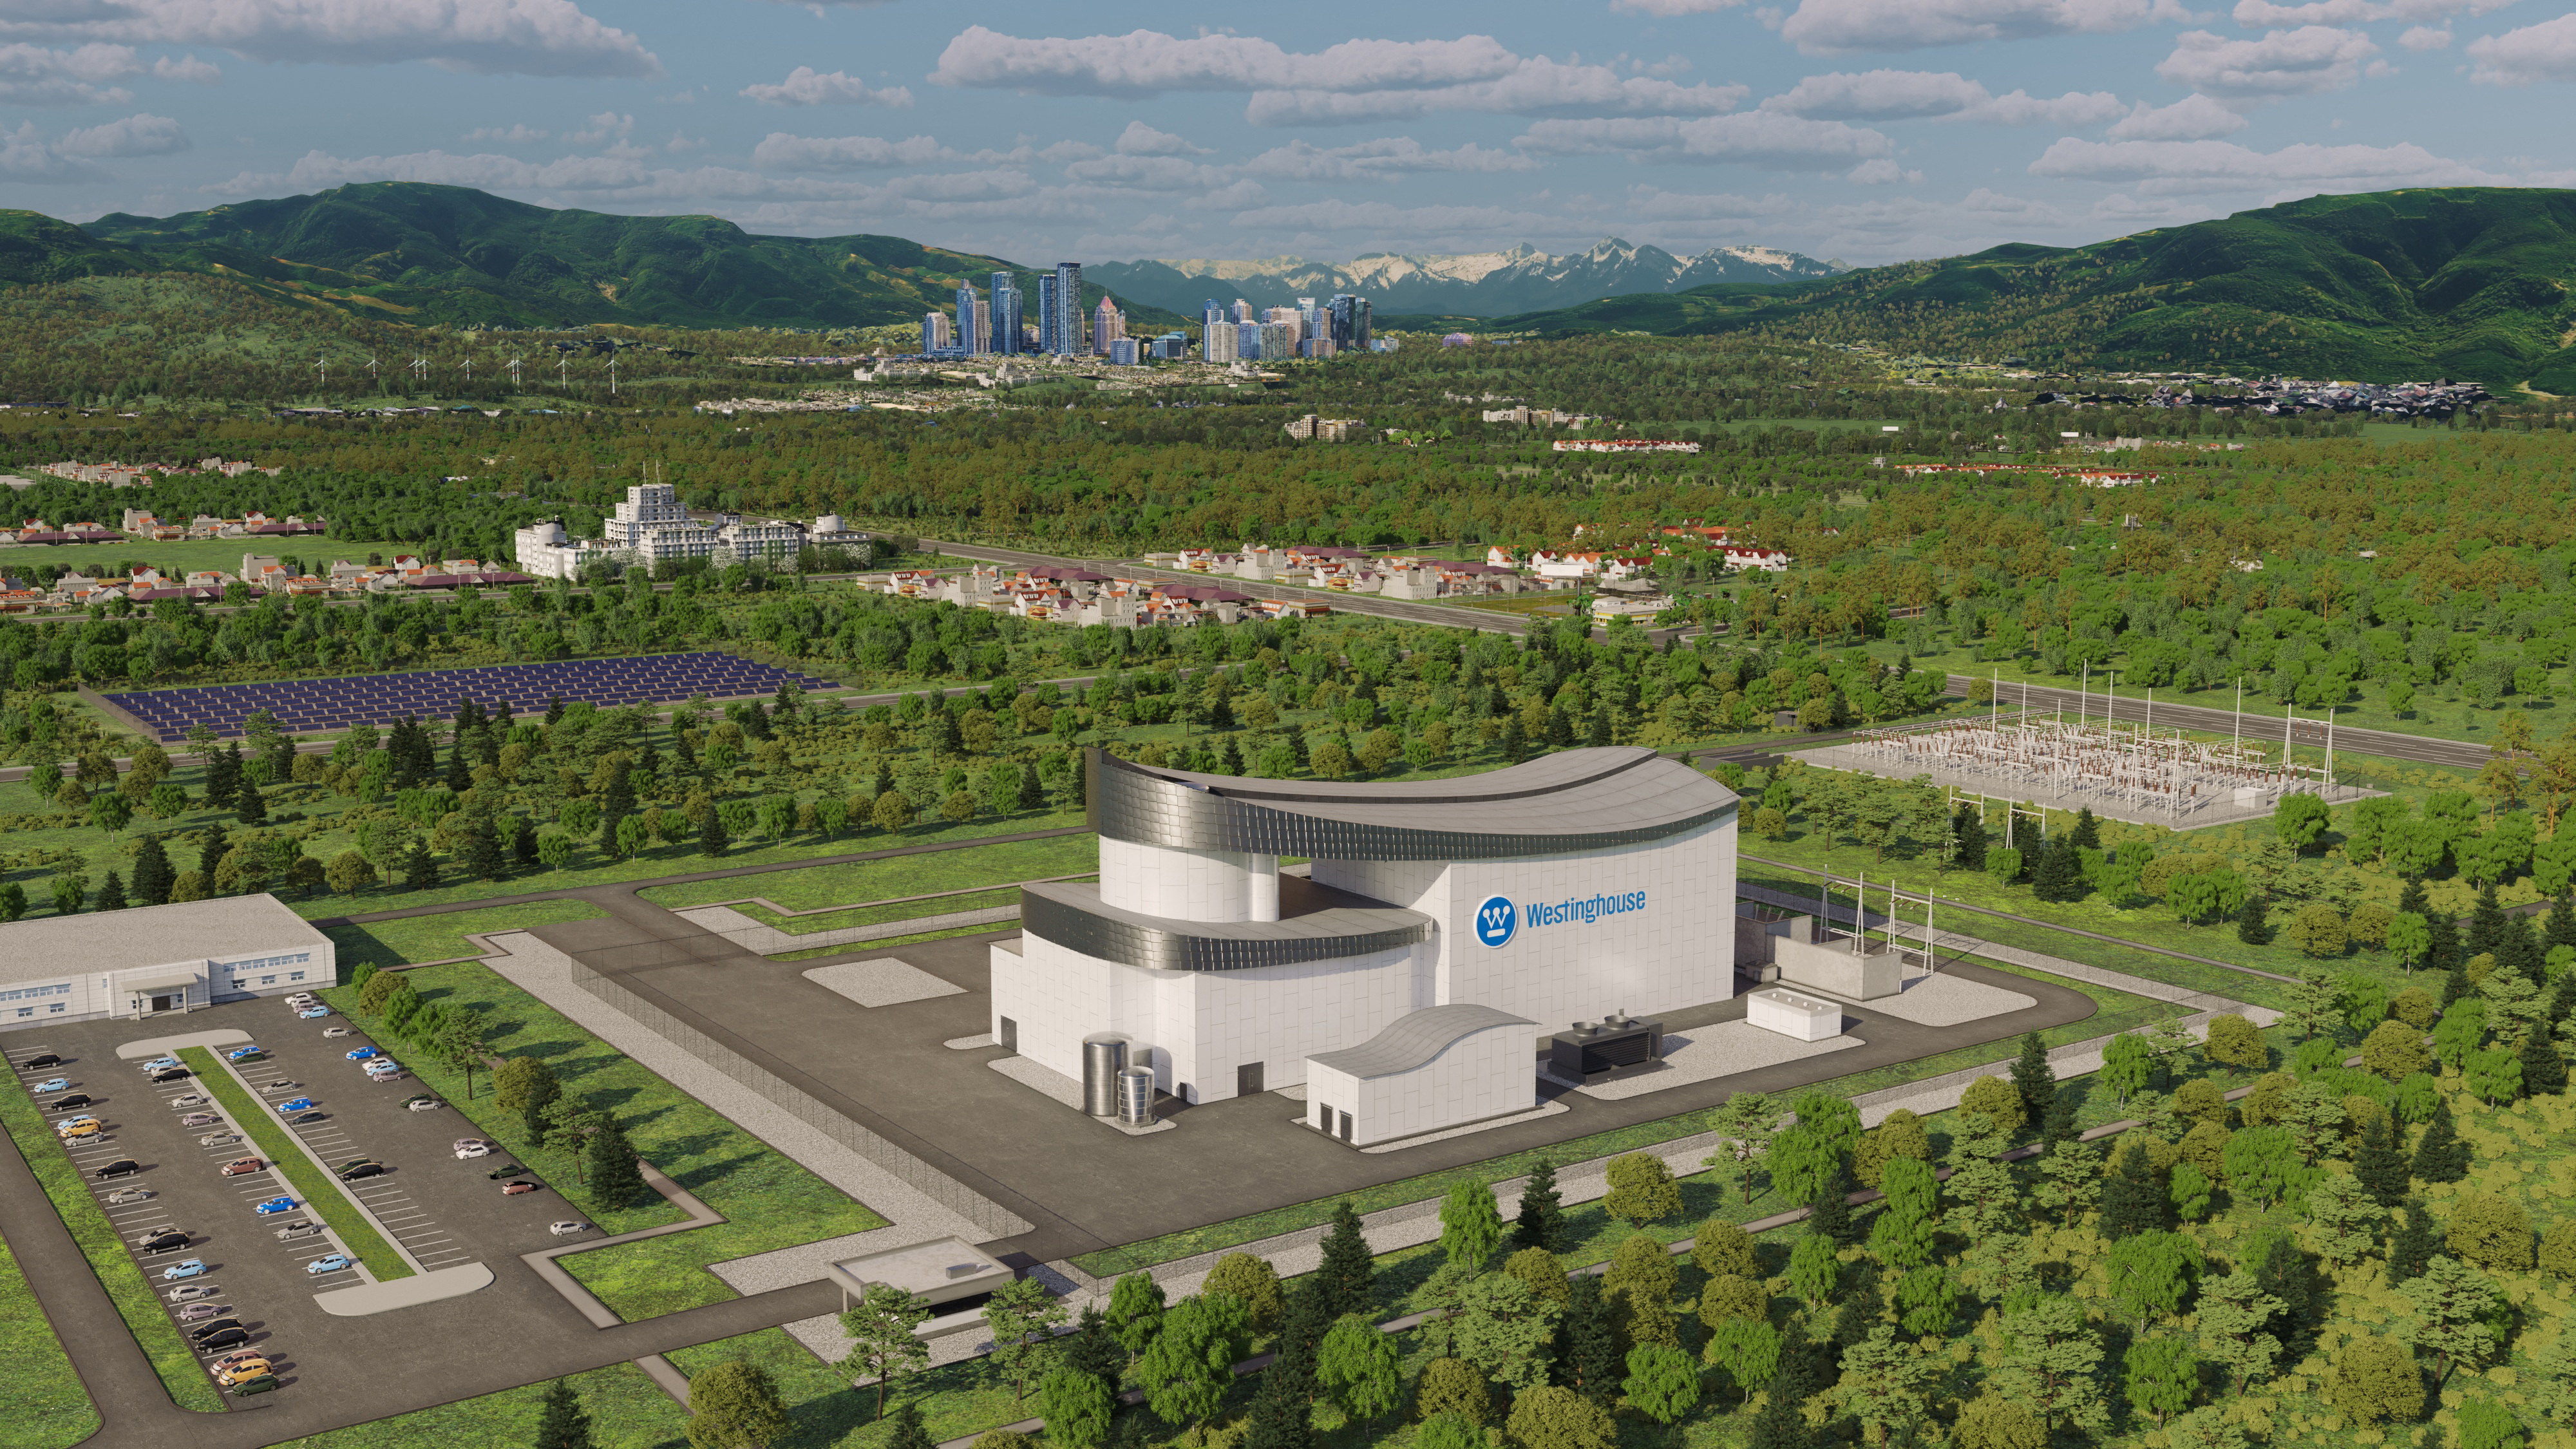 Artist rendering shows Westinghouse’s AP300 small modular nuclear power reactor